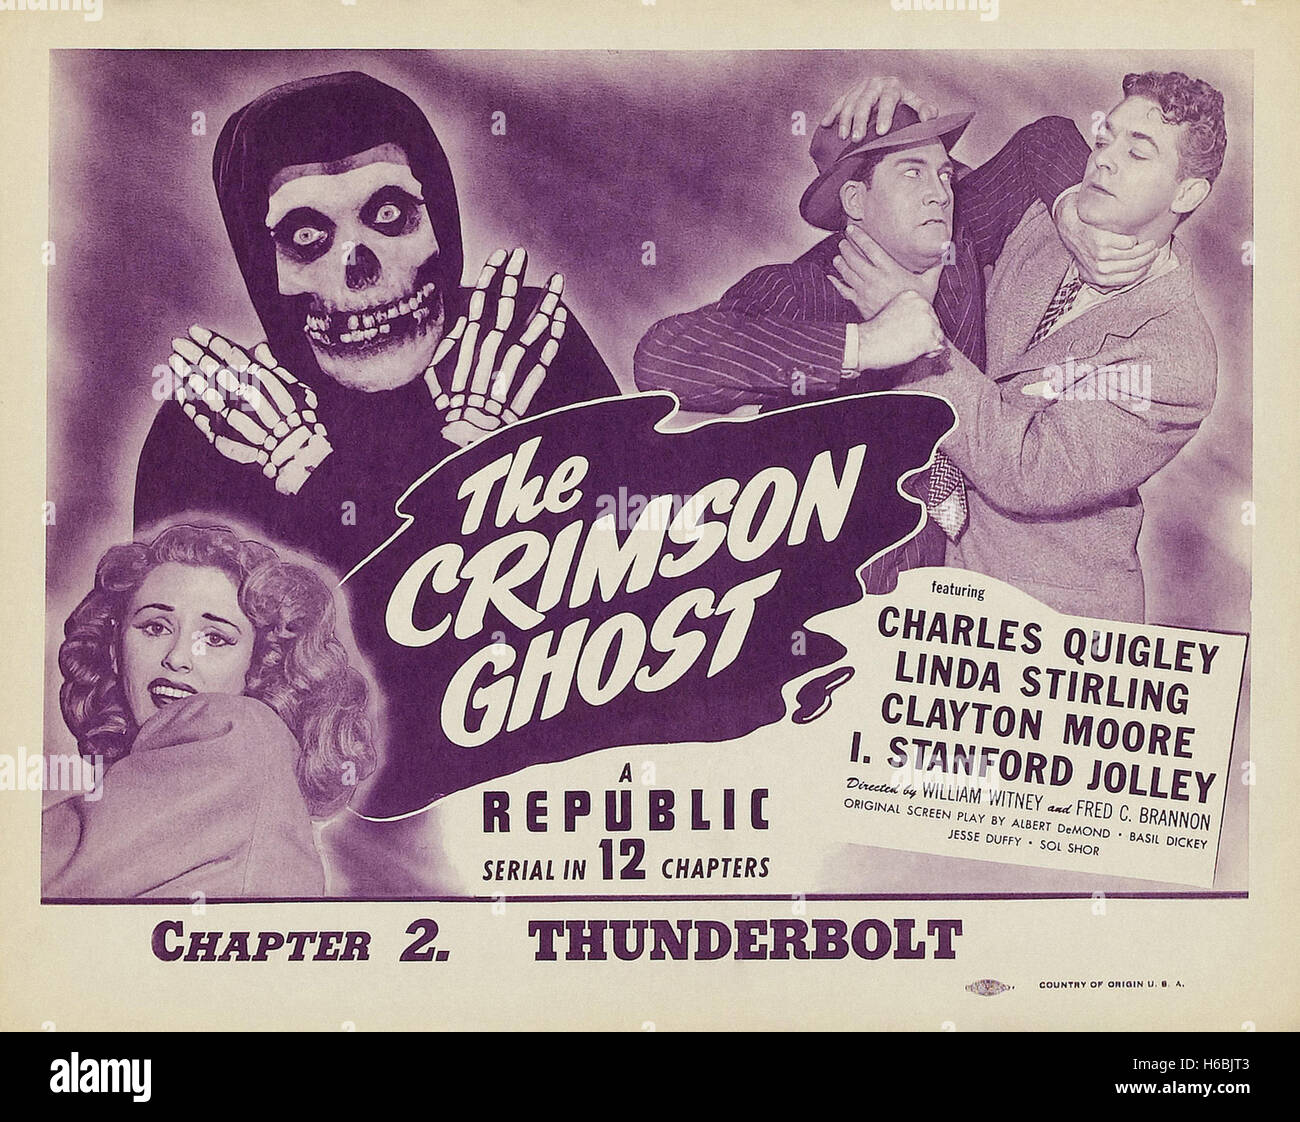 The Crimson Ghost - Movie Poster - Banque D'Images